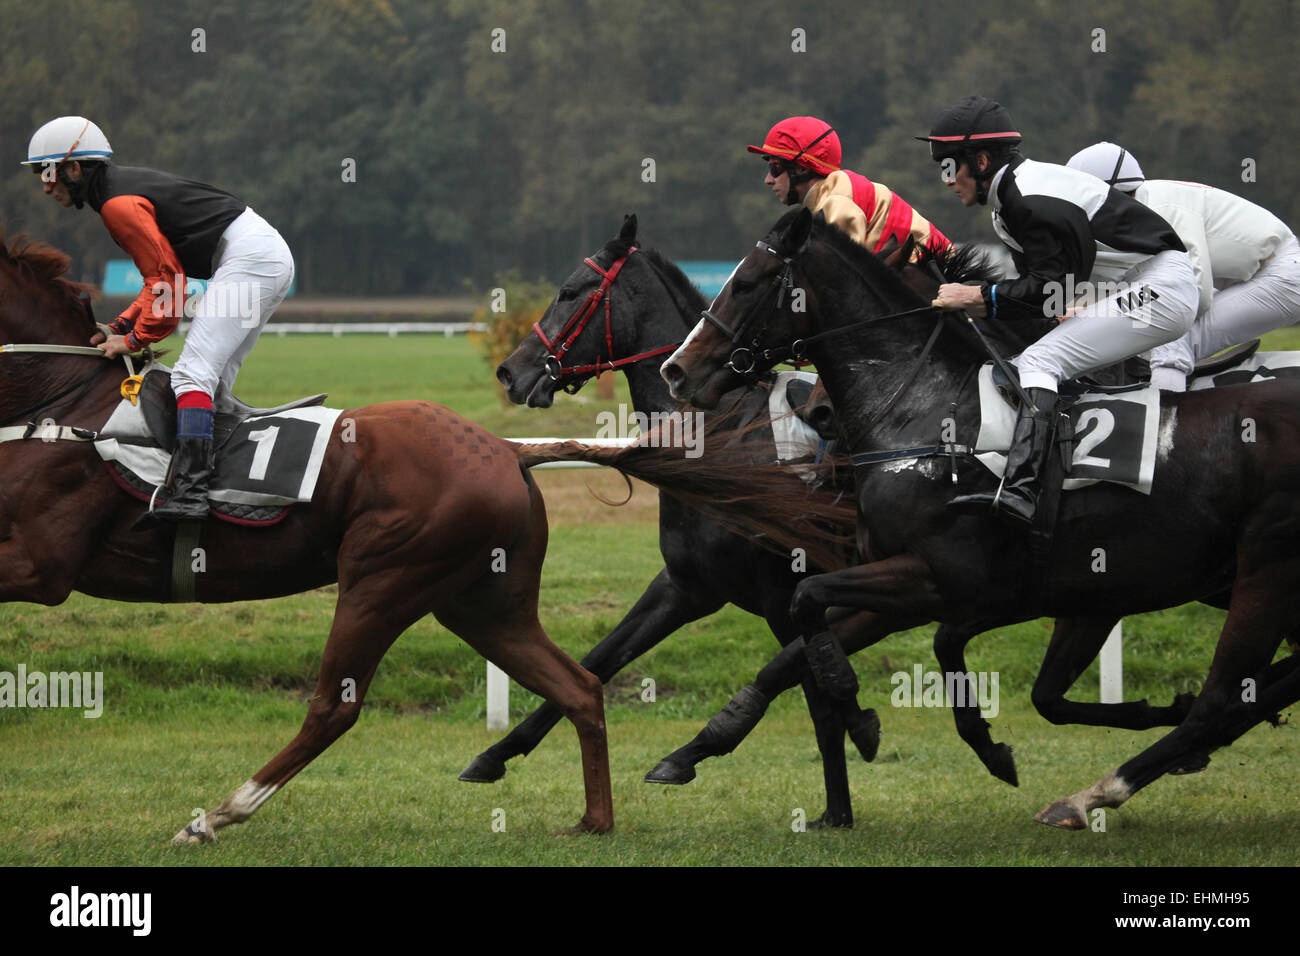 Jockeys and their horses compete during the Velka Pardubicka Steeplechase in Pardubice, Czech Republic. Velka Pardubicka Steeplechase is known as the toughest steeplechase in continental Europe. Stock Photo